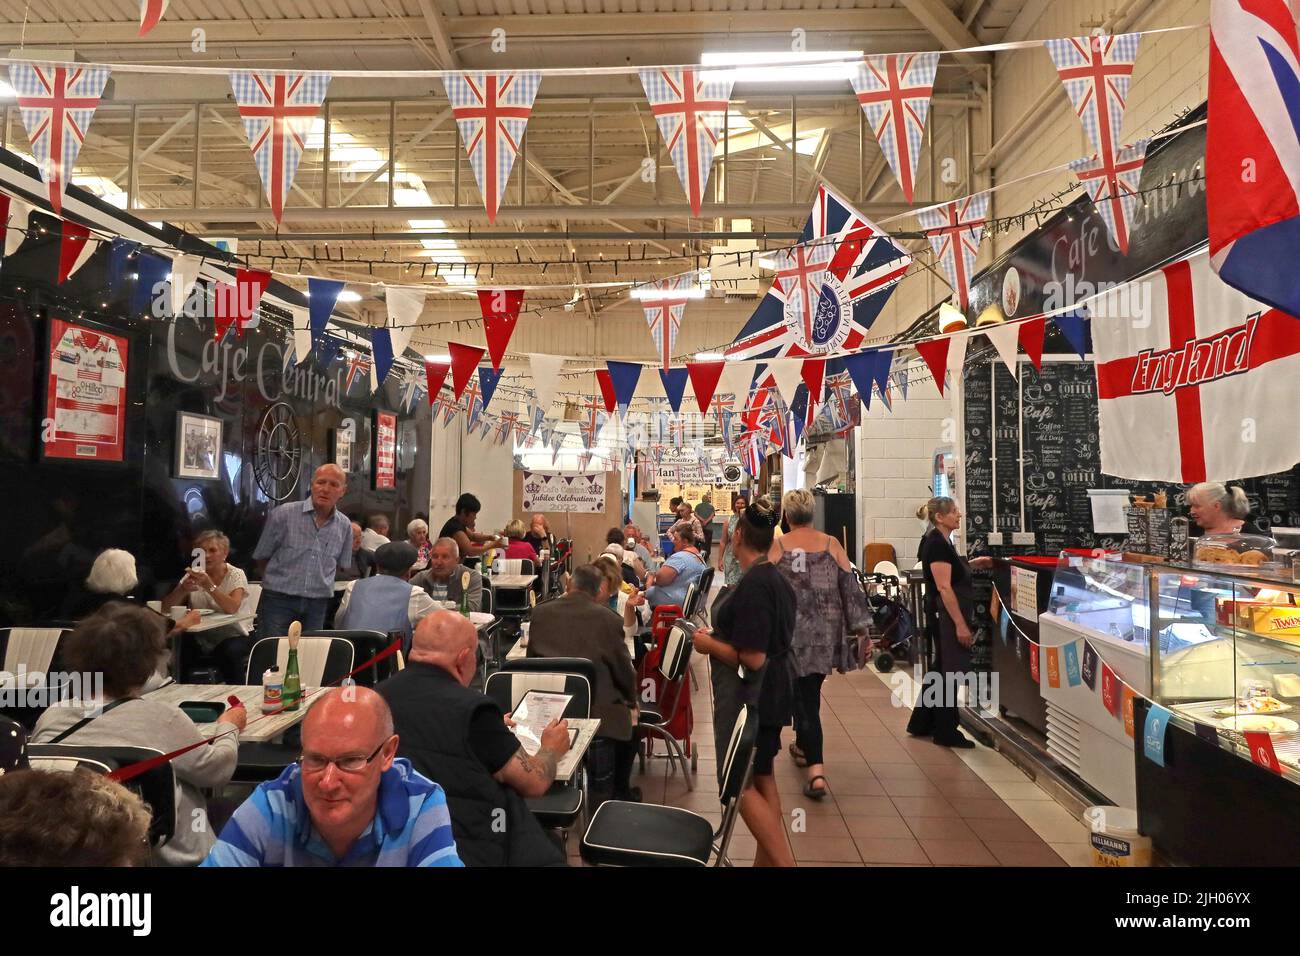 Cafe Central at Leigh covered indoor market hall with flags / bunting, Gas St, Leigh, Lancashire, England, UK,  WN7 4PG Stock Photo